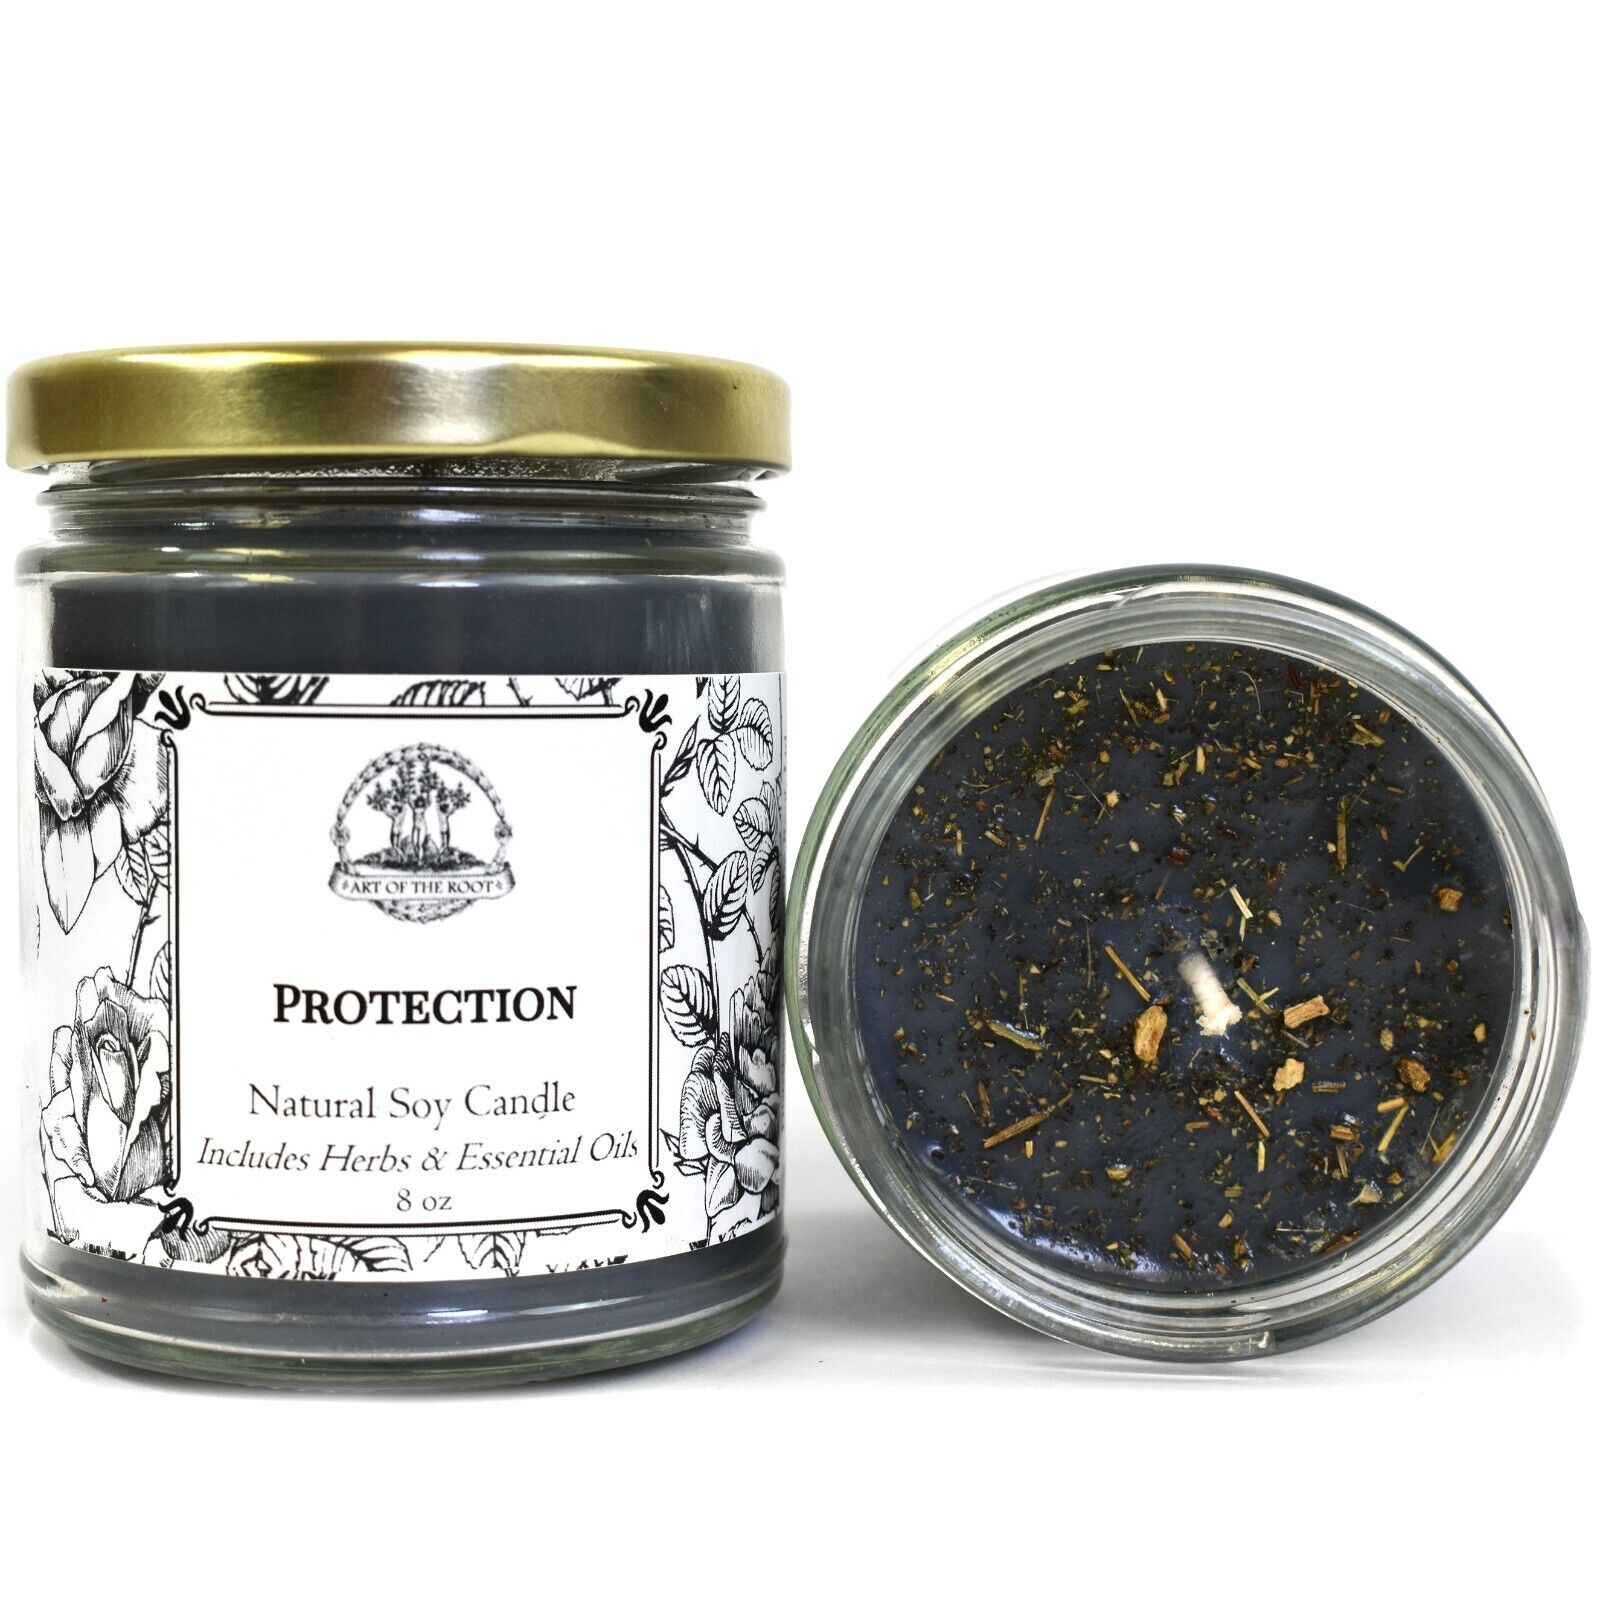 Protection 8 oz Soy Candle Spells Evil Attacks Hoodoo Voodoo Wicca Pagan Conjure